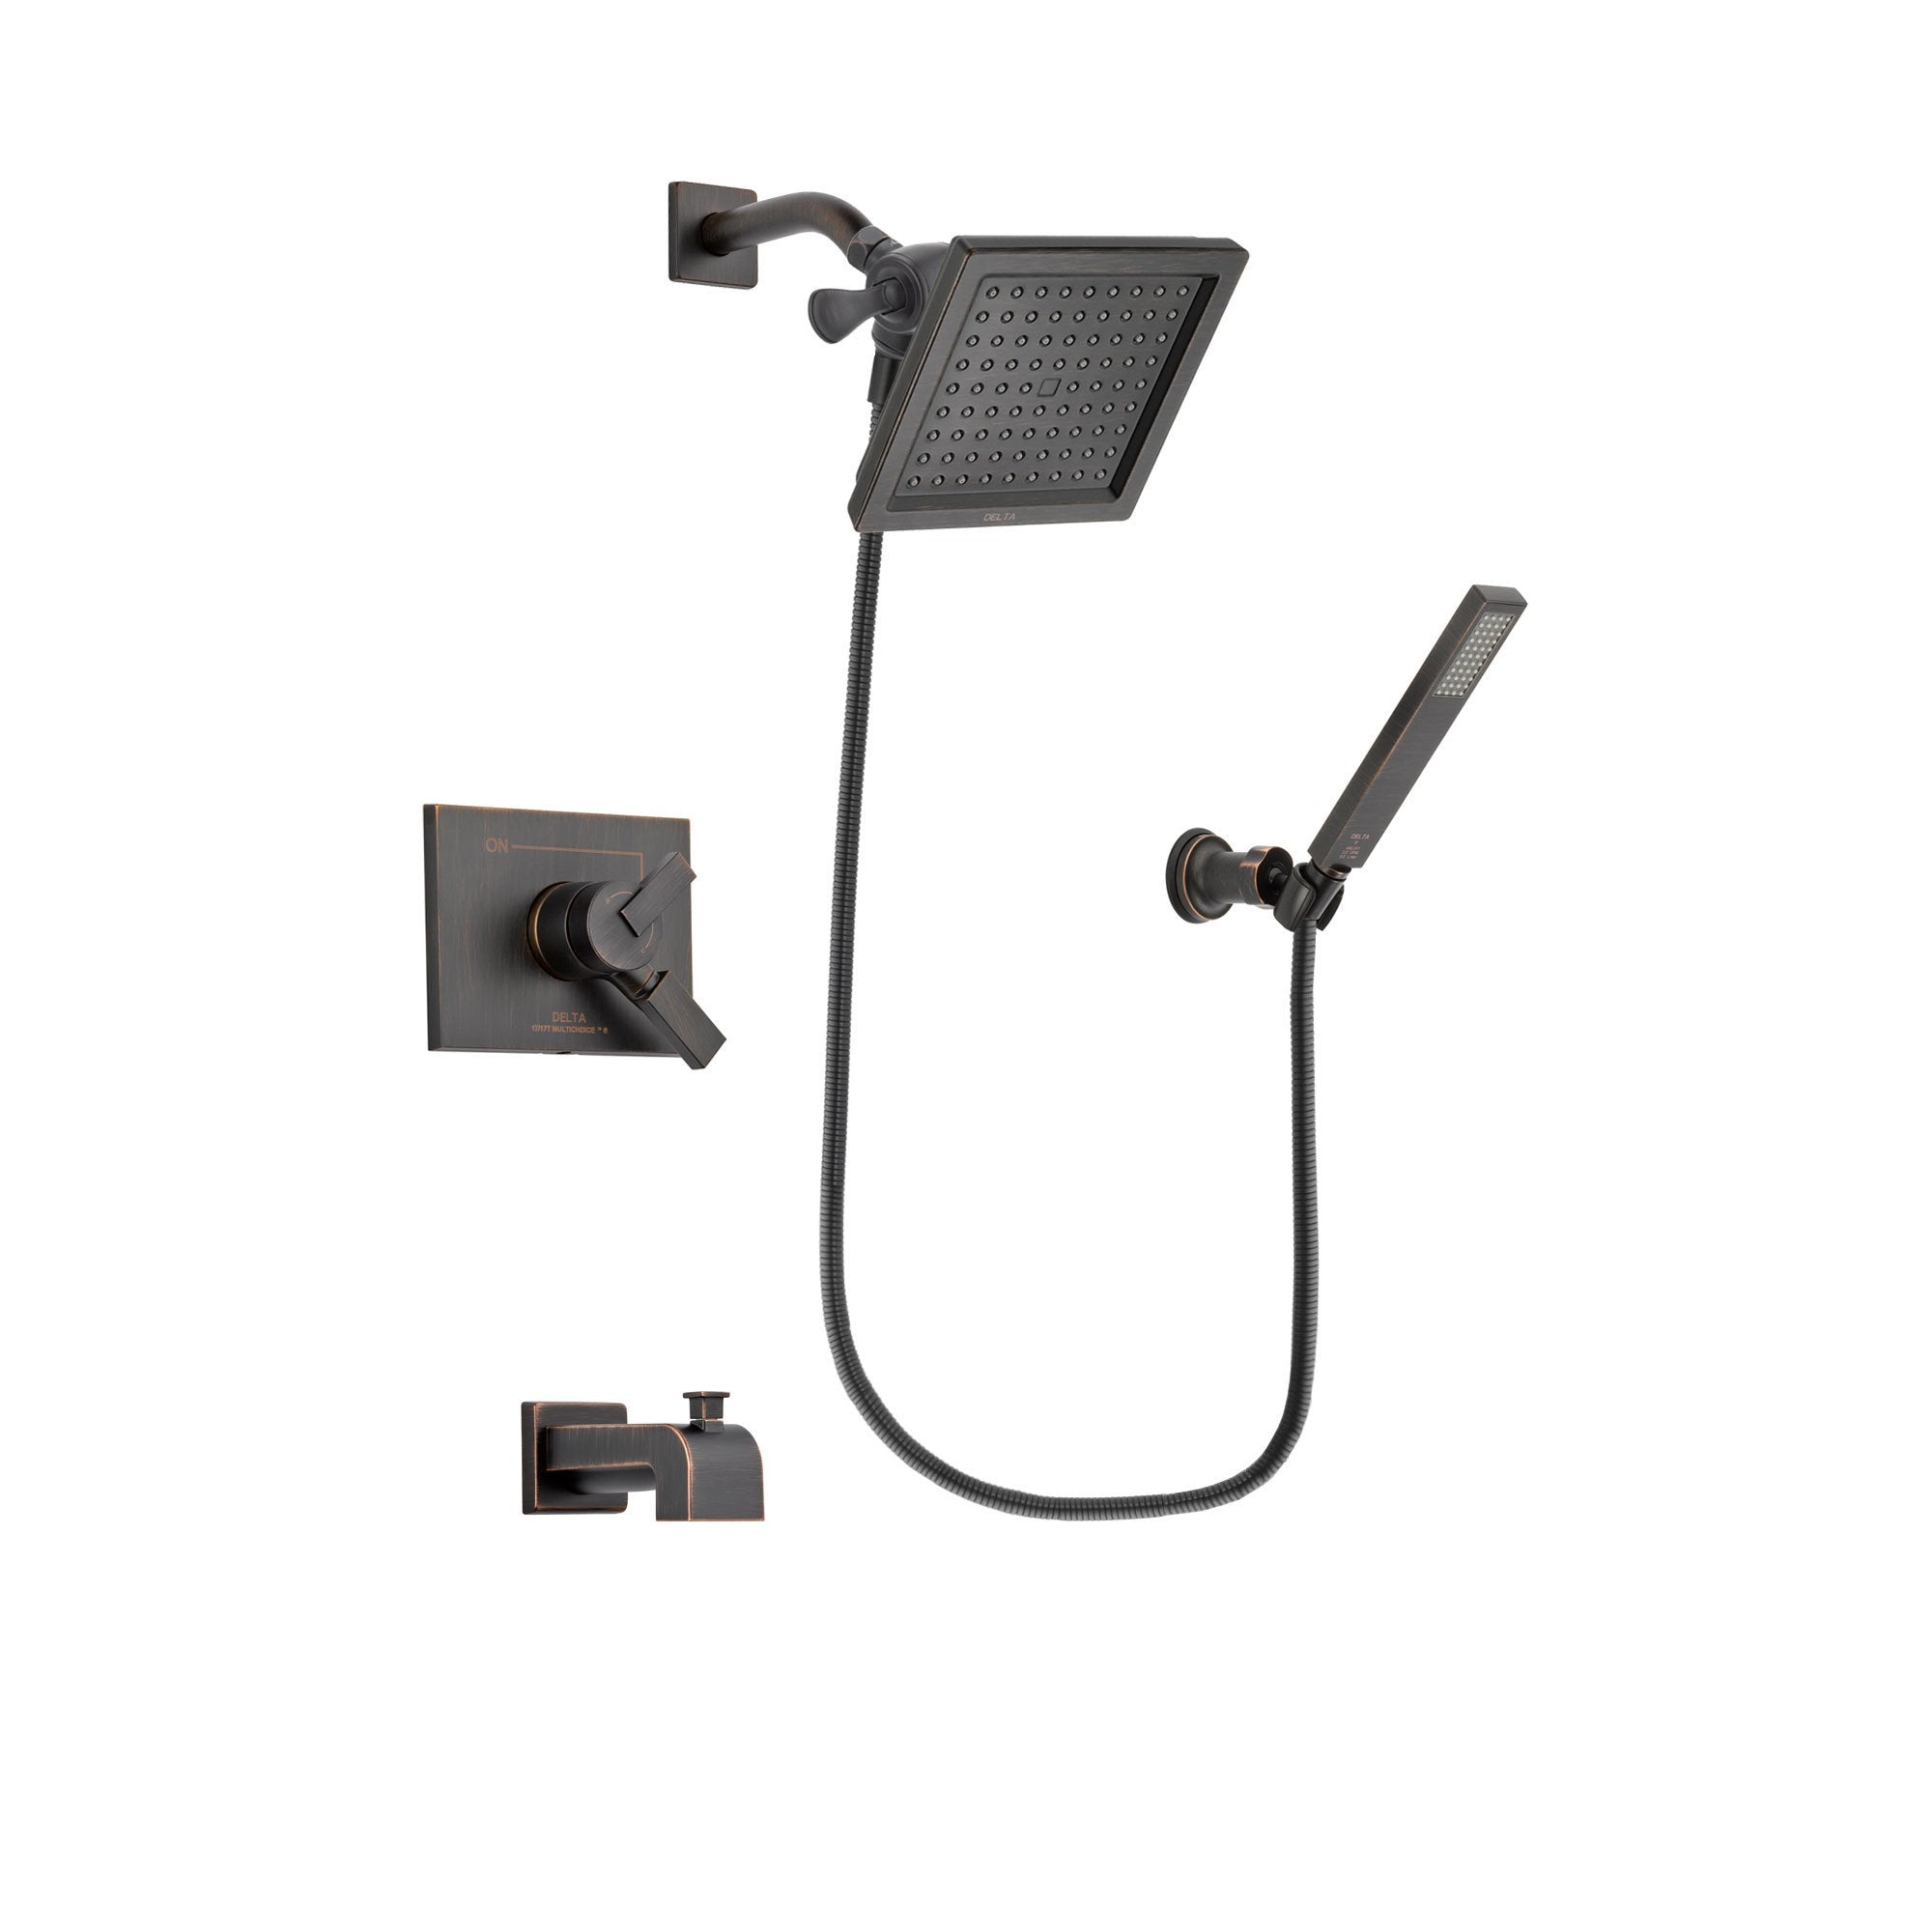 Delta Vero Venetian Bronze Tub and Shower Faucet System with Hand Spray DSP3267V